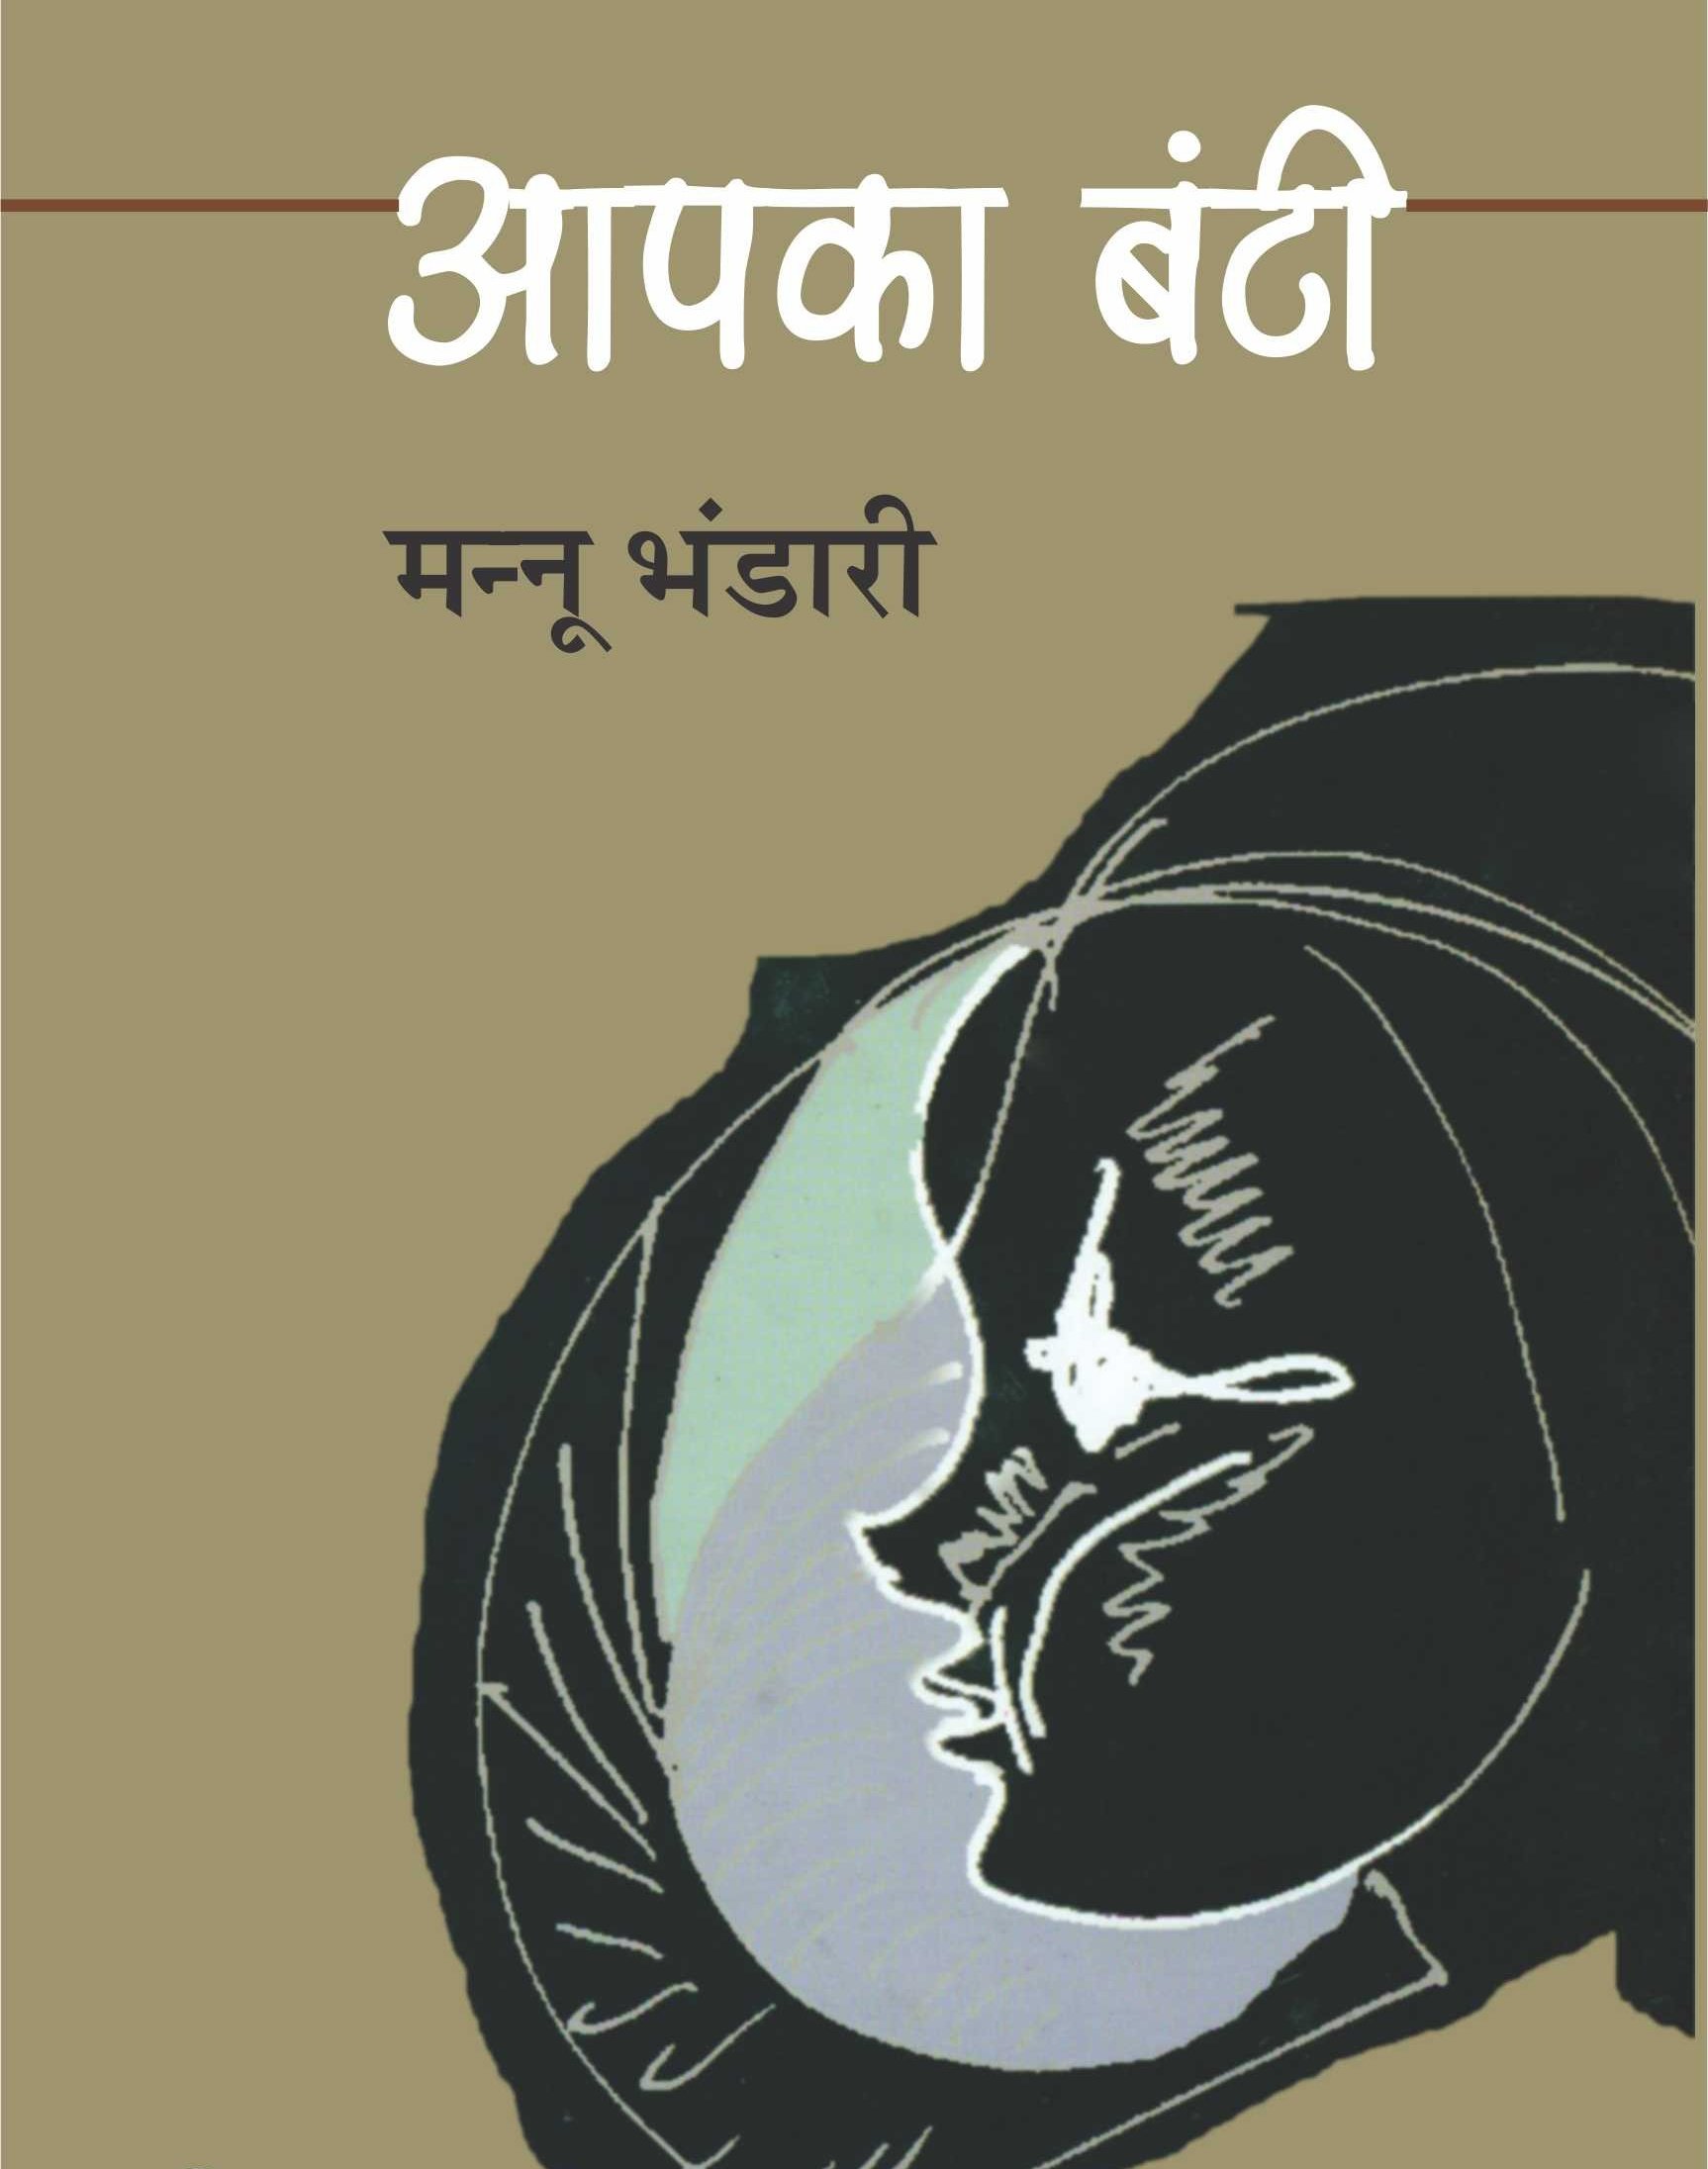 book review of any book in hindi